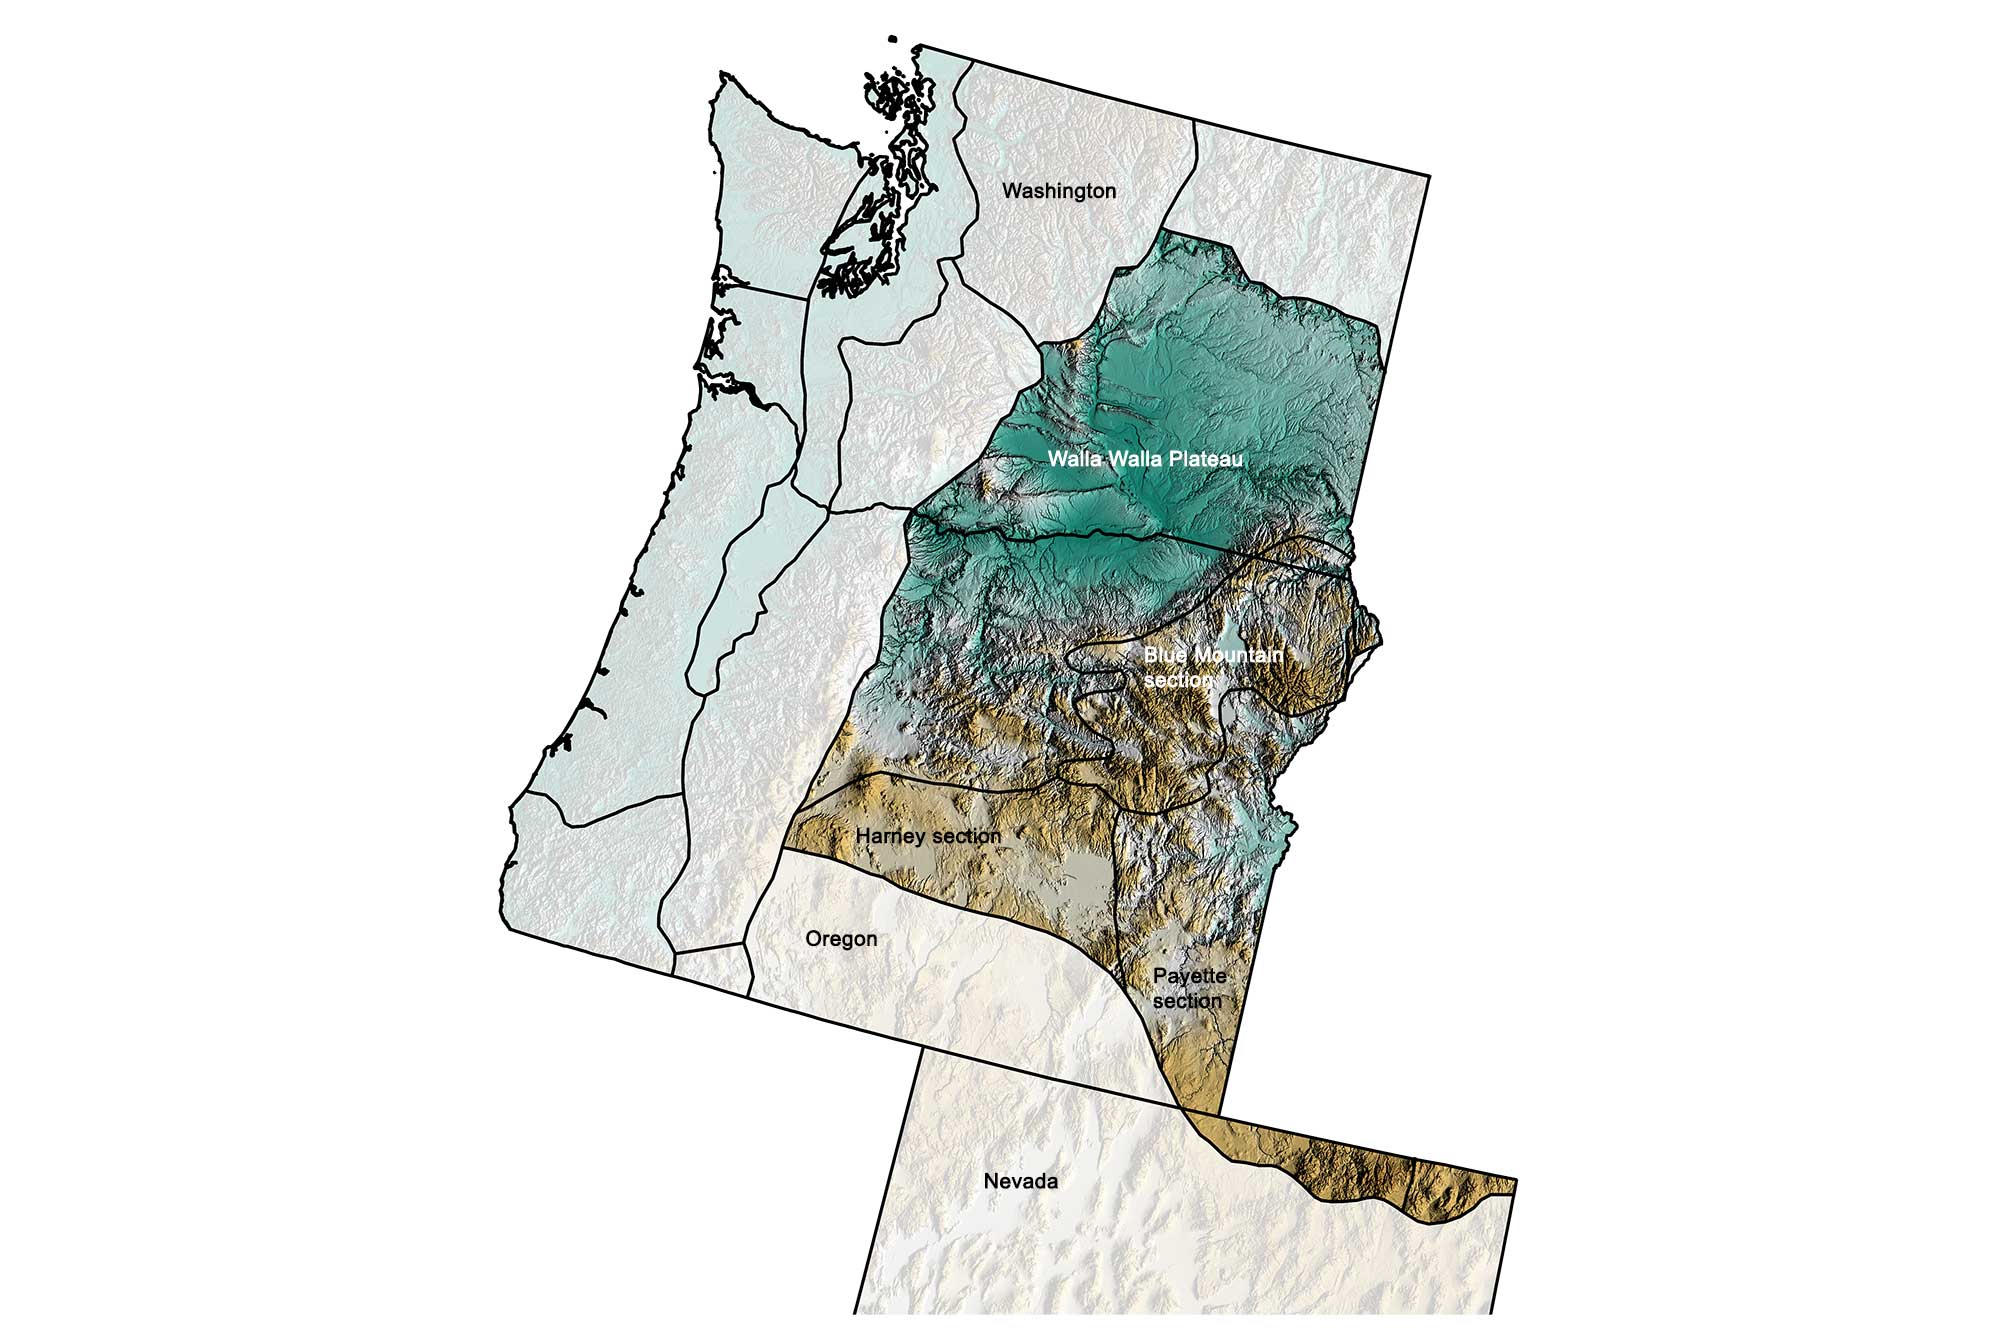 Topographic map of the Columbia Plateau of the western United States.